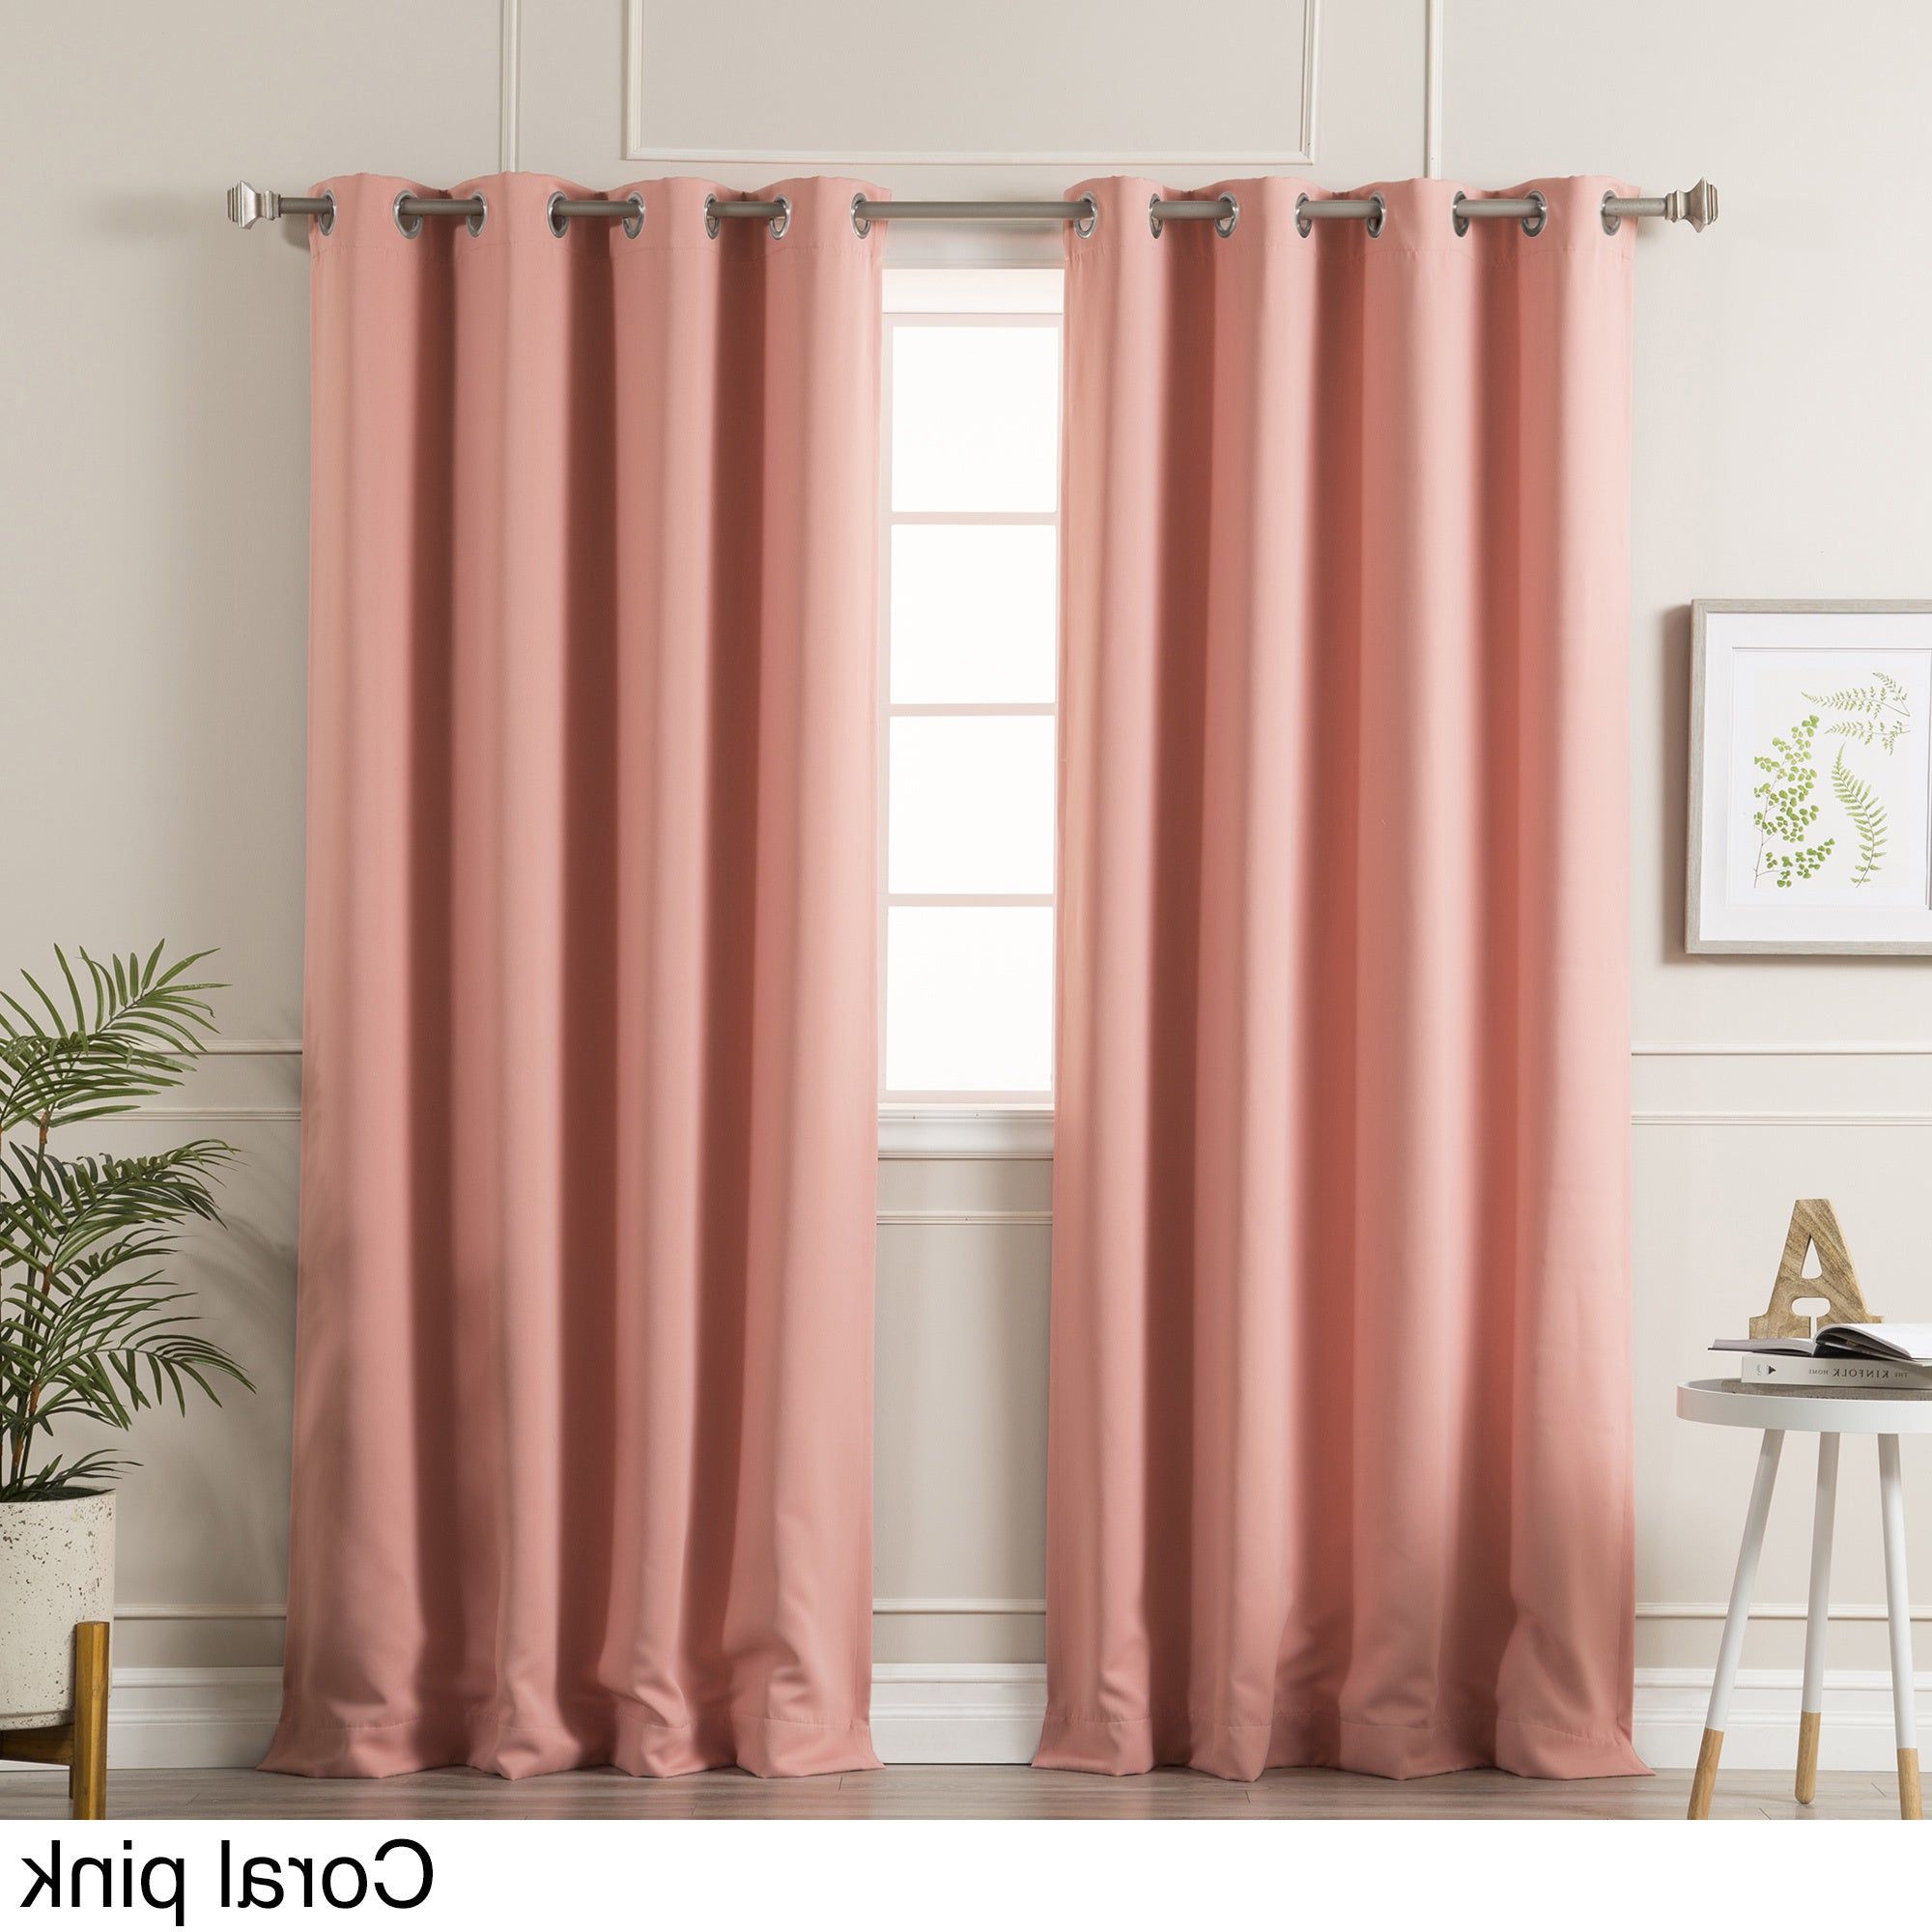 Aurora Home Silvertone Grommet Top Thermal Insulated Blackout Curtain Panel  Pair Intended For Latest Thermal Insulated Blackout Curtain Panel Pairs (View 19 of 20)